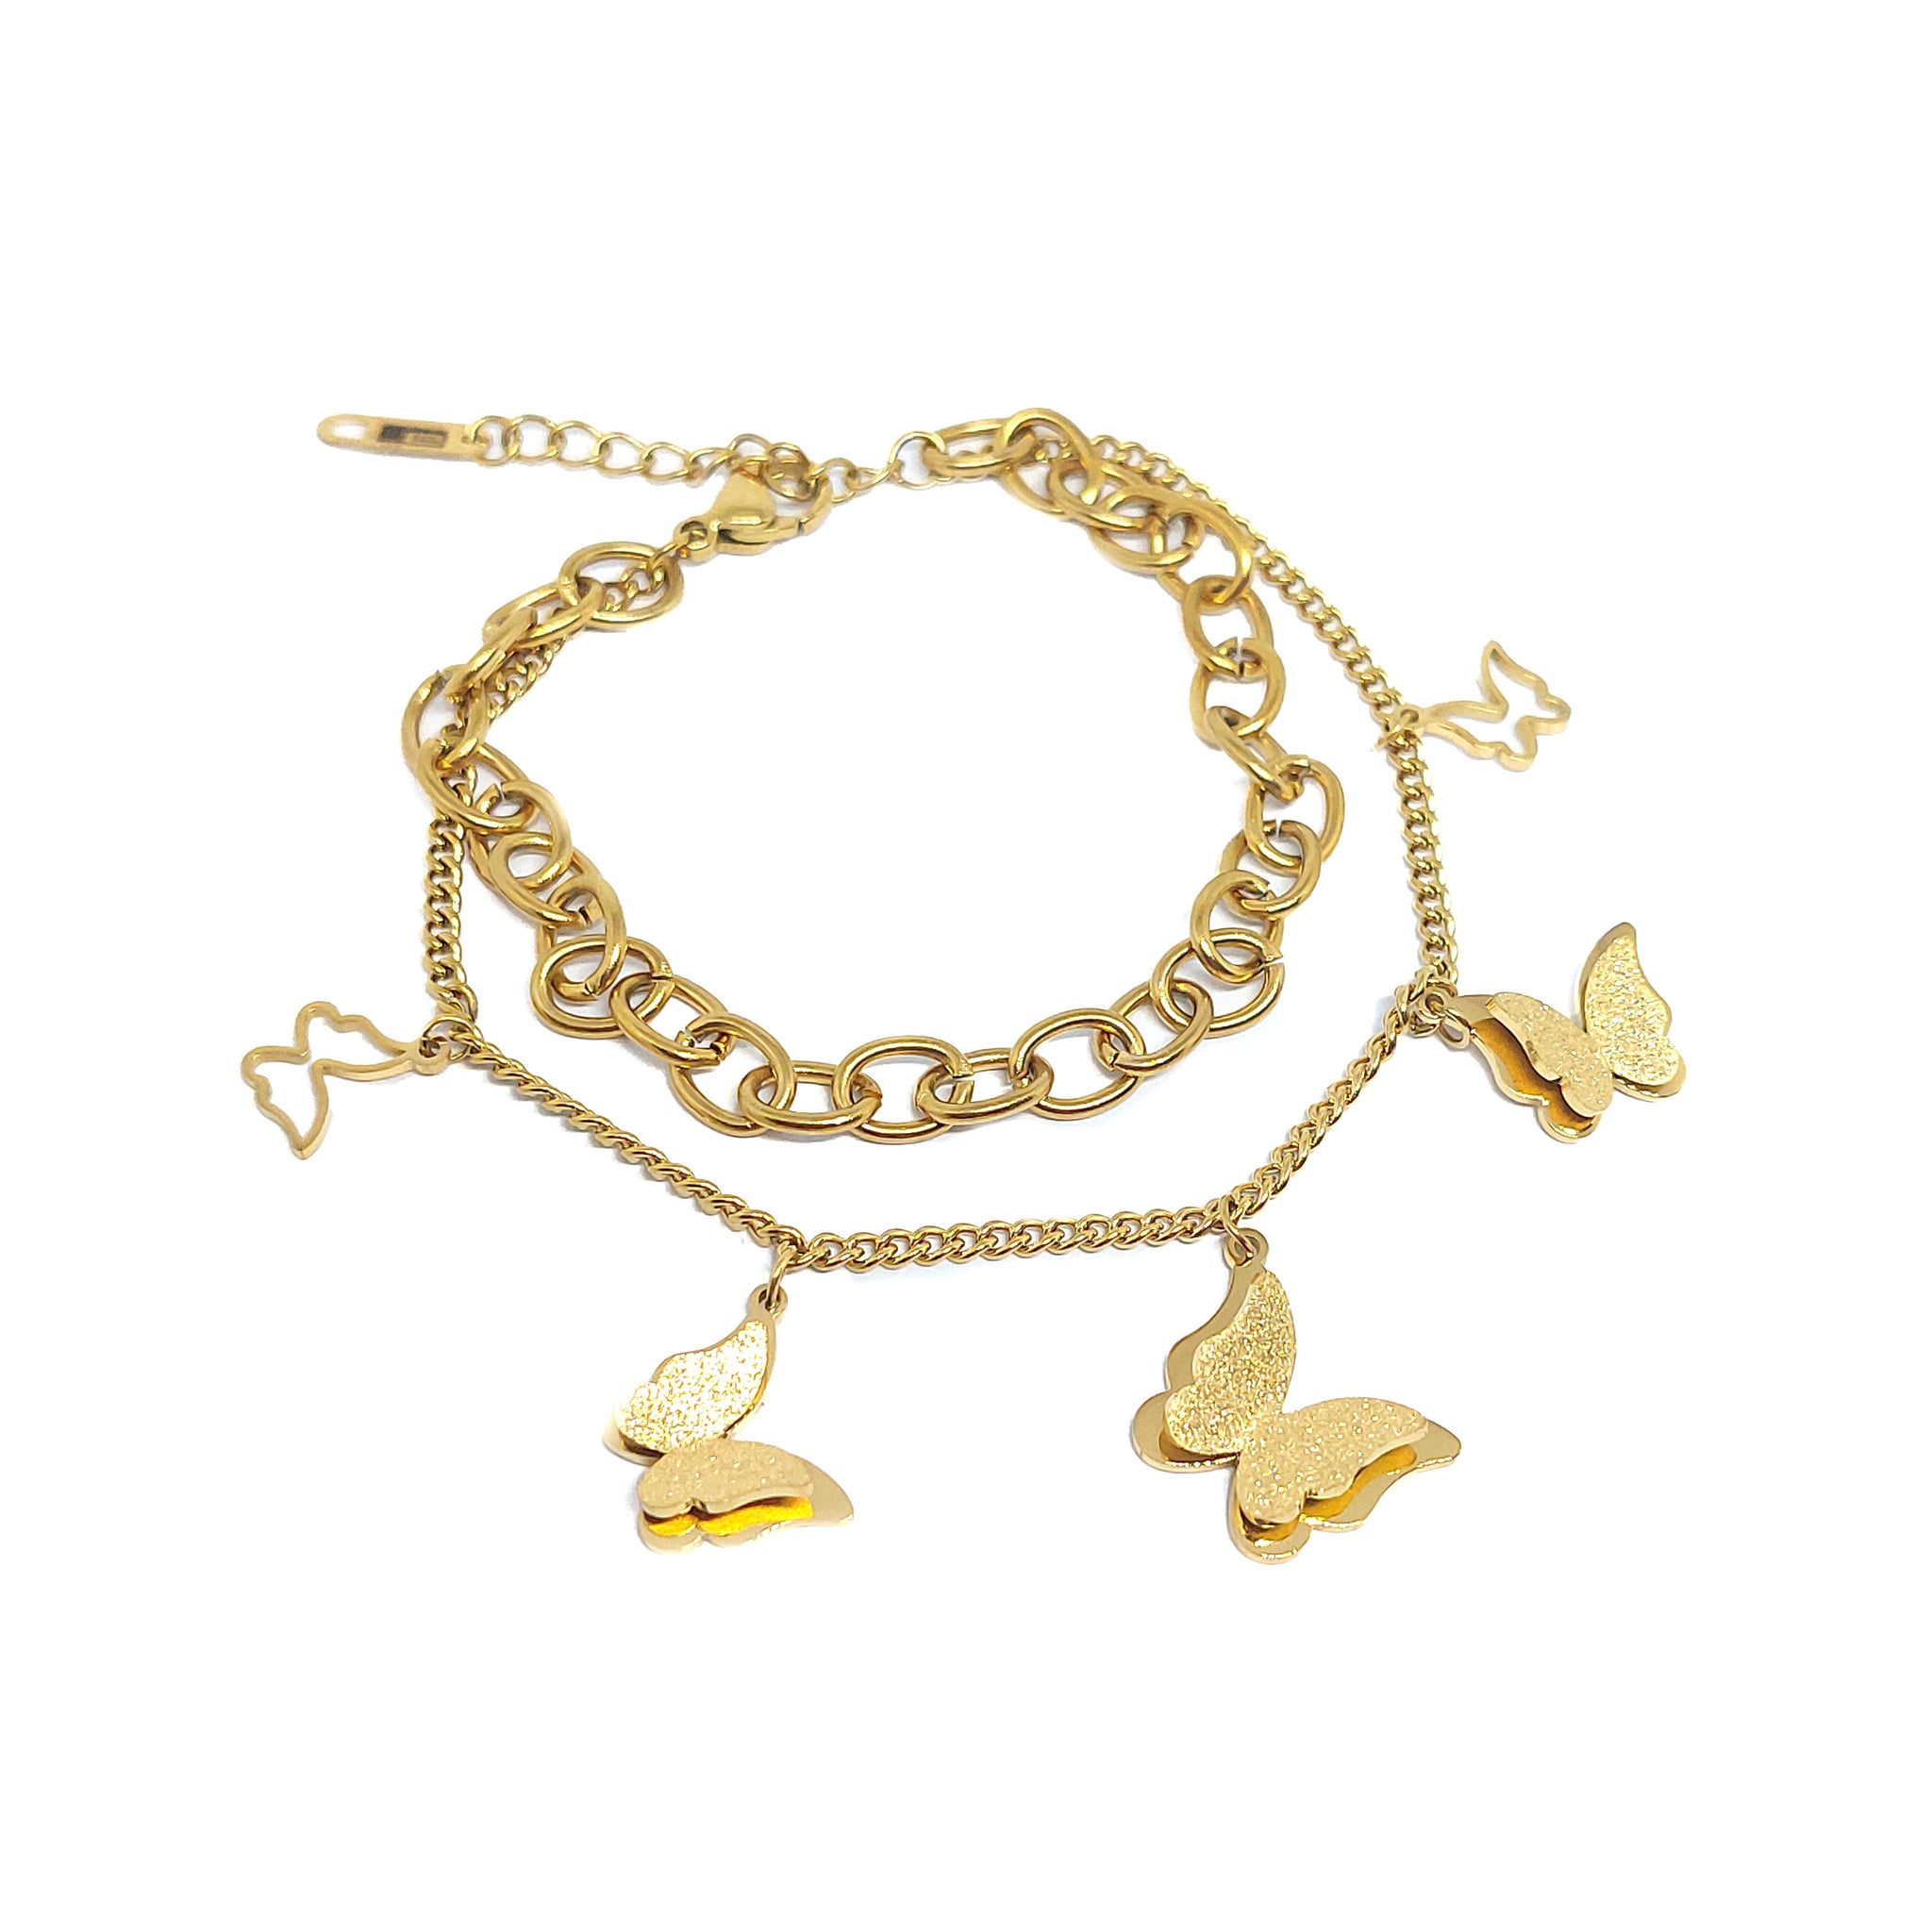 ESBL 7837: Gold-Plated Double SB Butterfly & Chain Bracelet